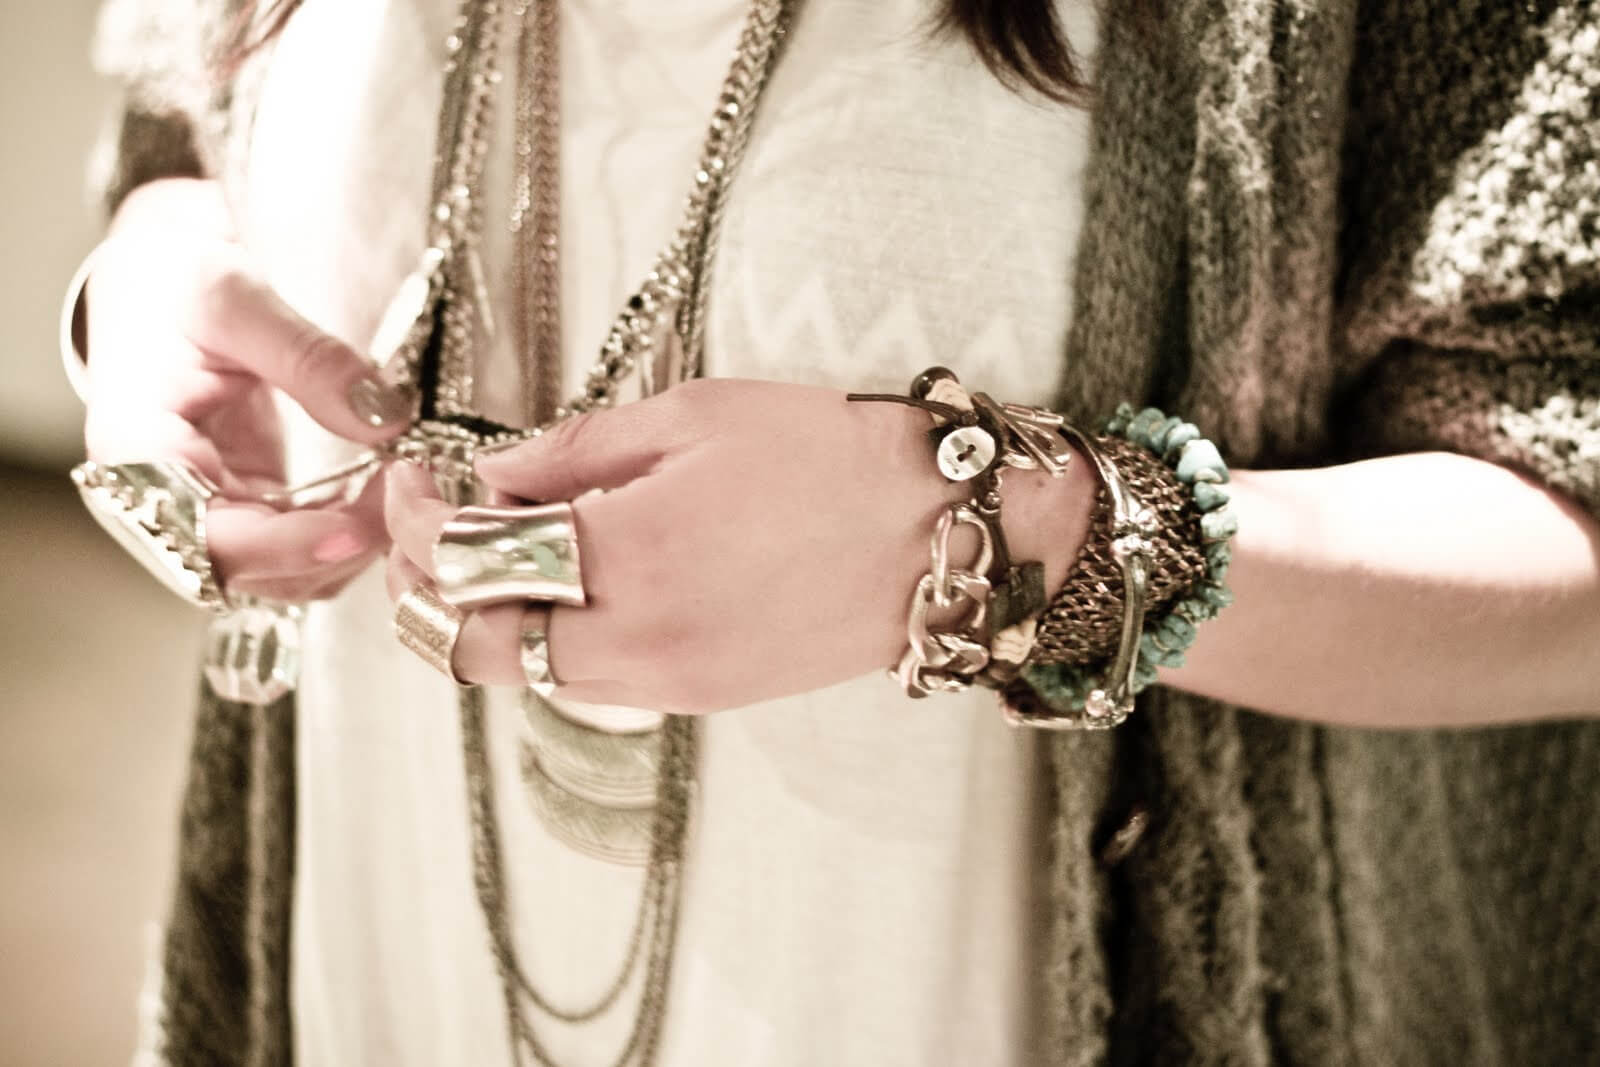 INCREDIBLE WAYS TO ENHANCE YOUR LOOK WITH FASHION JEWELRY